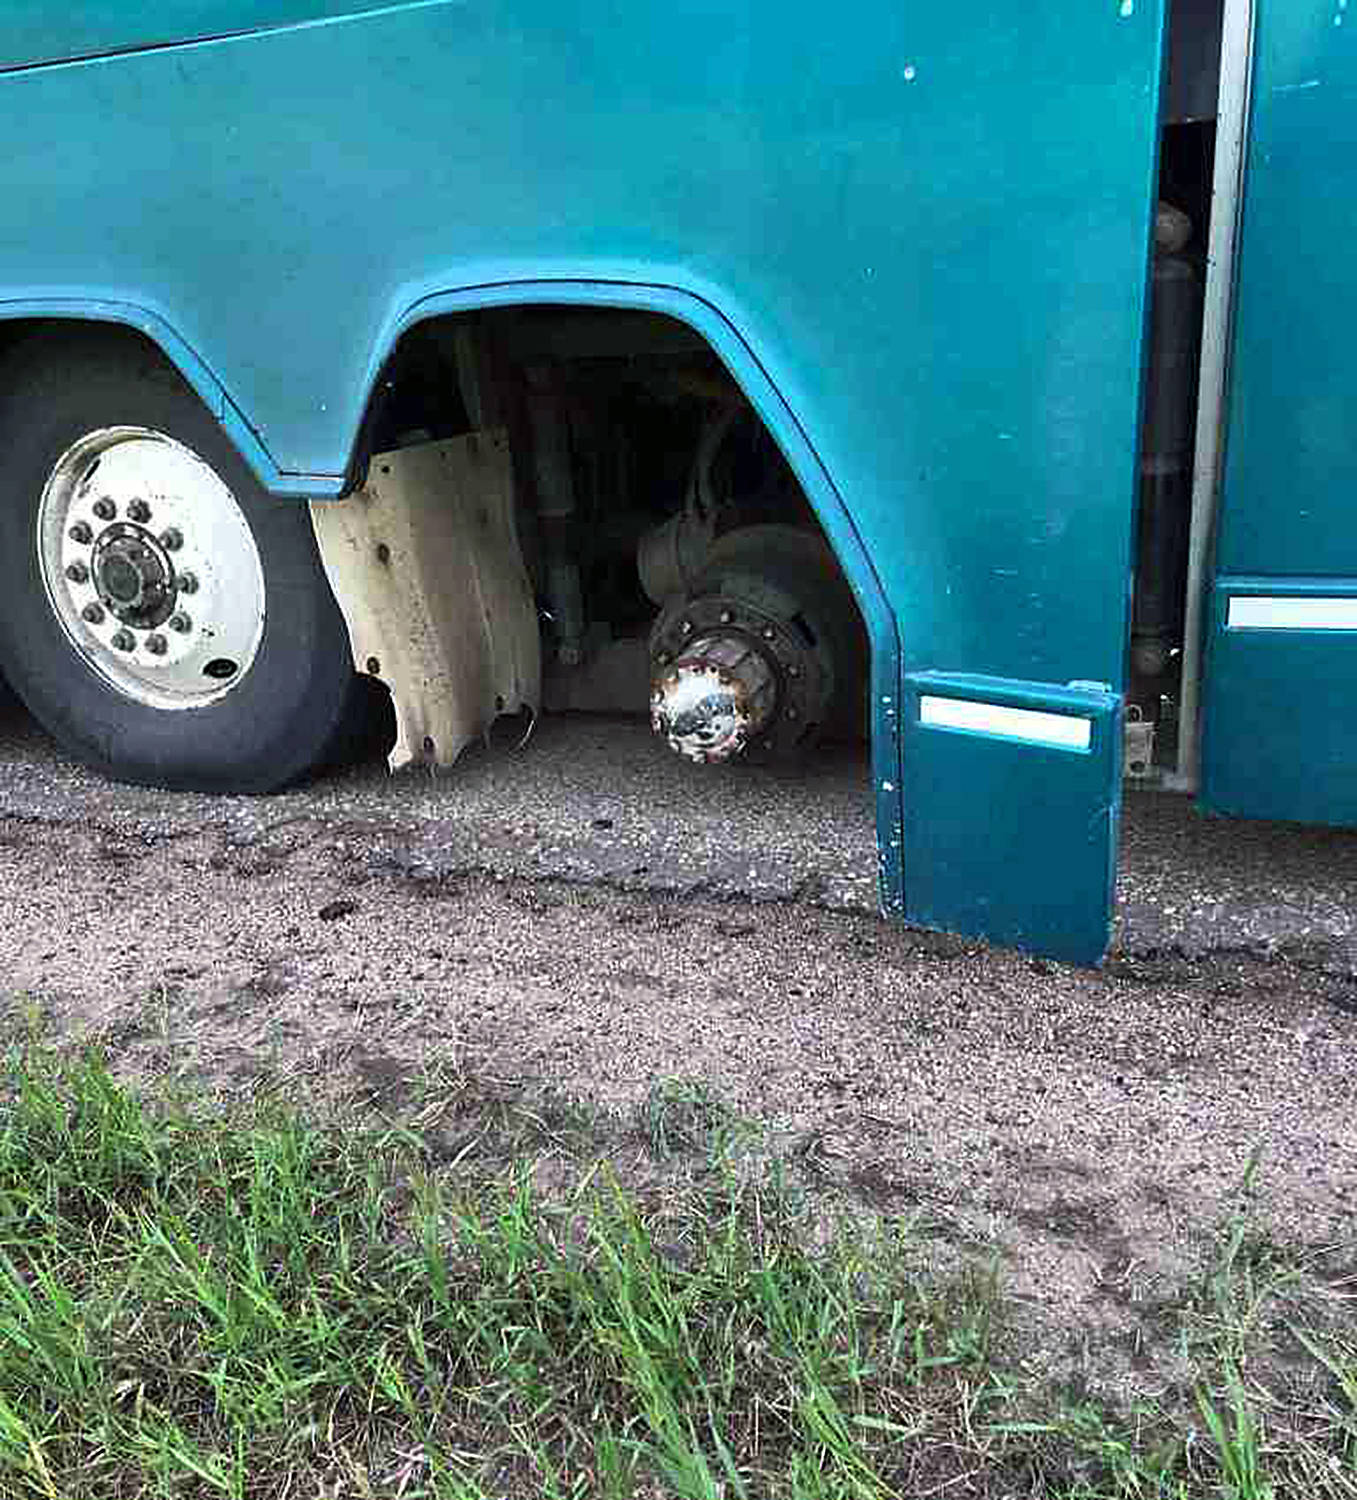 A shot of the one rear axle, minus both tires, of the original bus that was transporting a group of Special Olympics athletes and coaches from Calgary to a training camp weekend in Edmonton June 1. Image: Ponoka County East District Fire Department